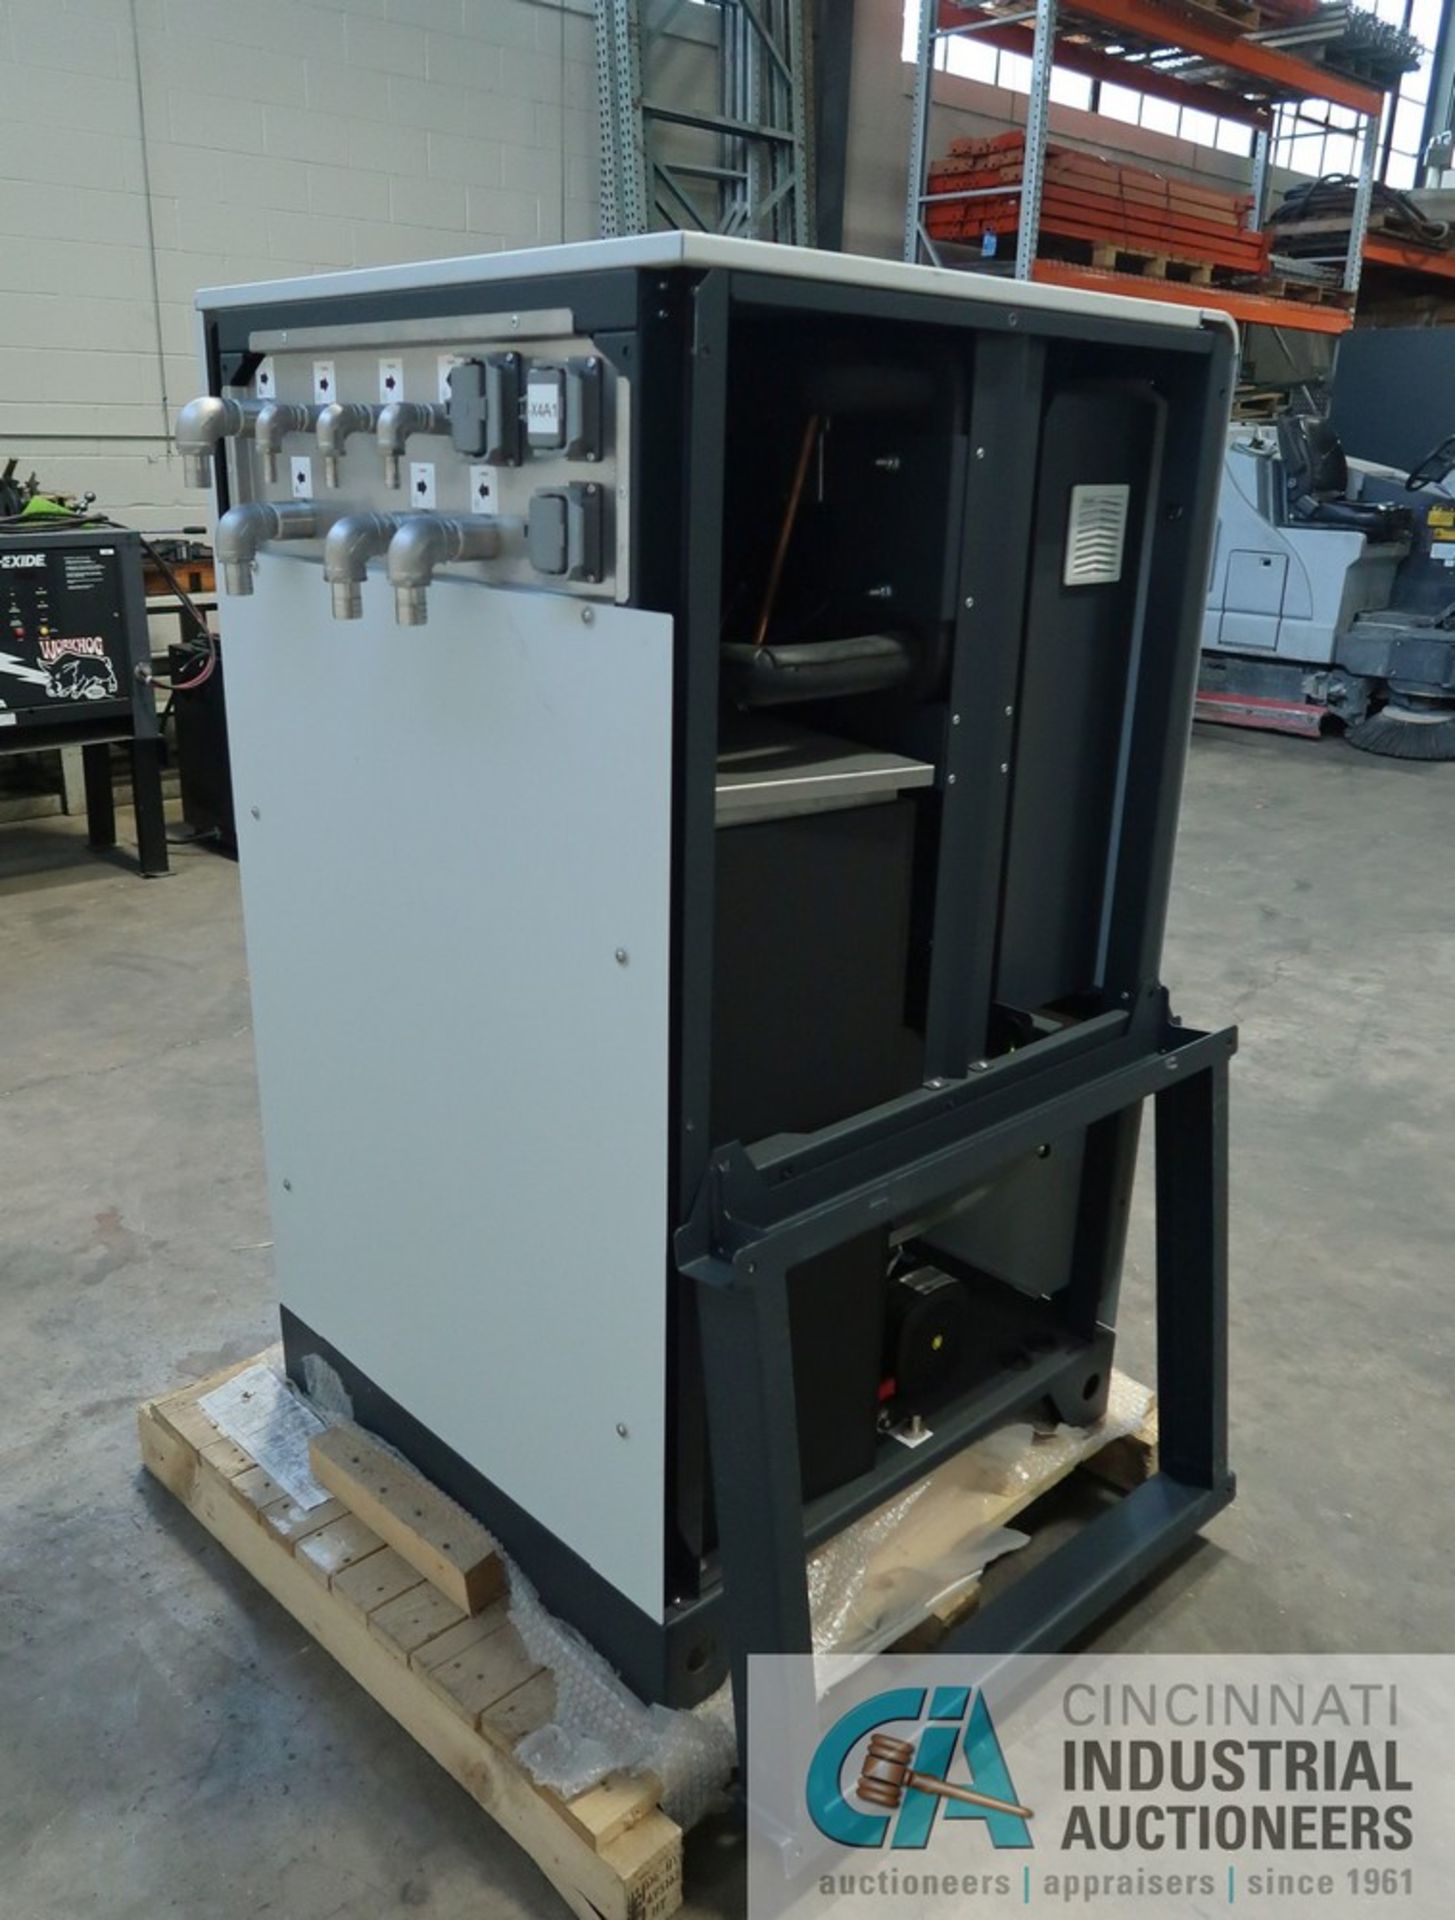 2016 KKT CHILLERS MODEL VBOX X6 VARIO-LINE CHILLER - Appears to be New, Never put in service; S/N - Image 3 of 9